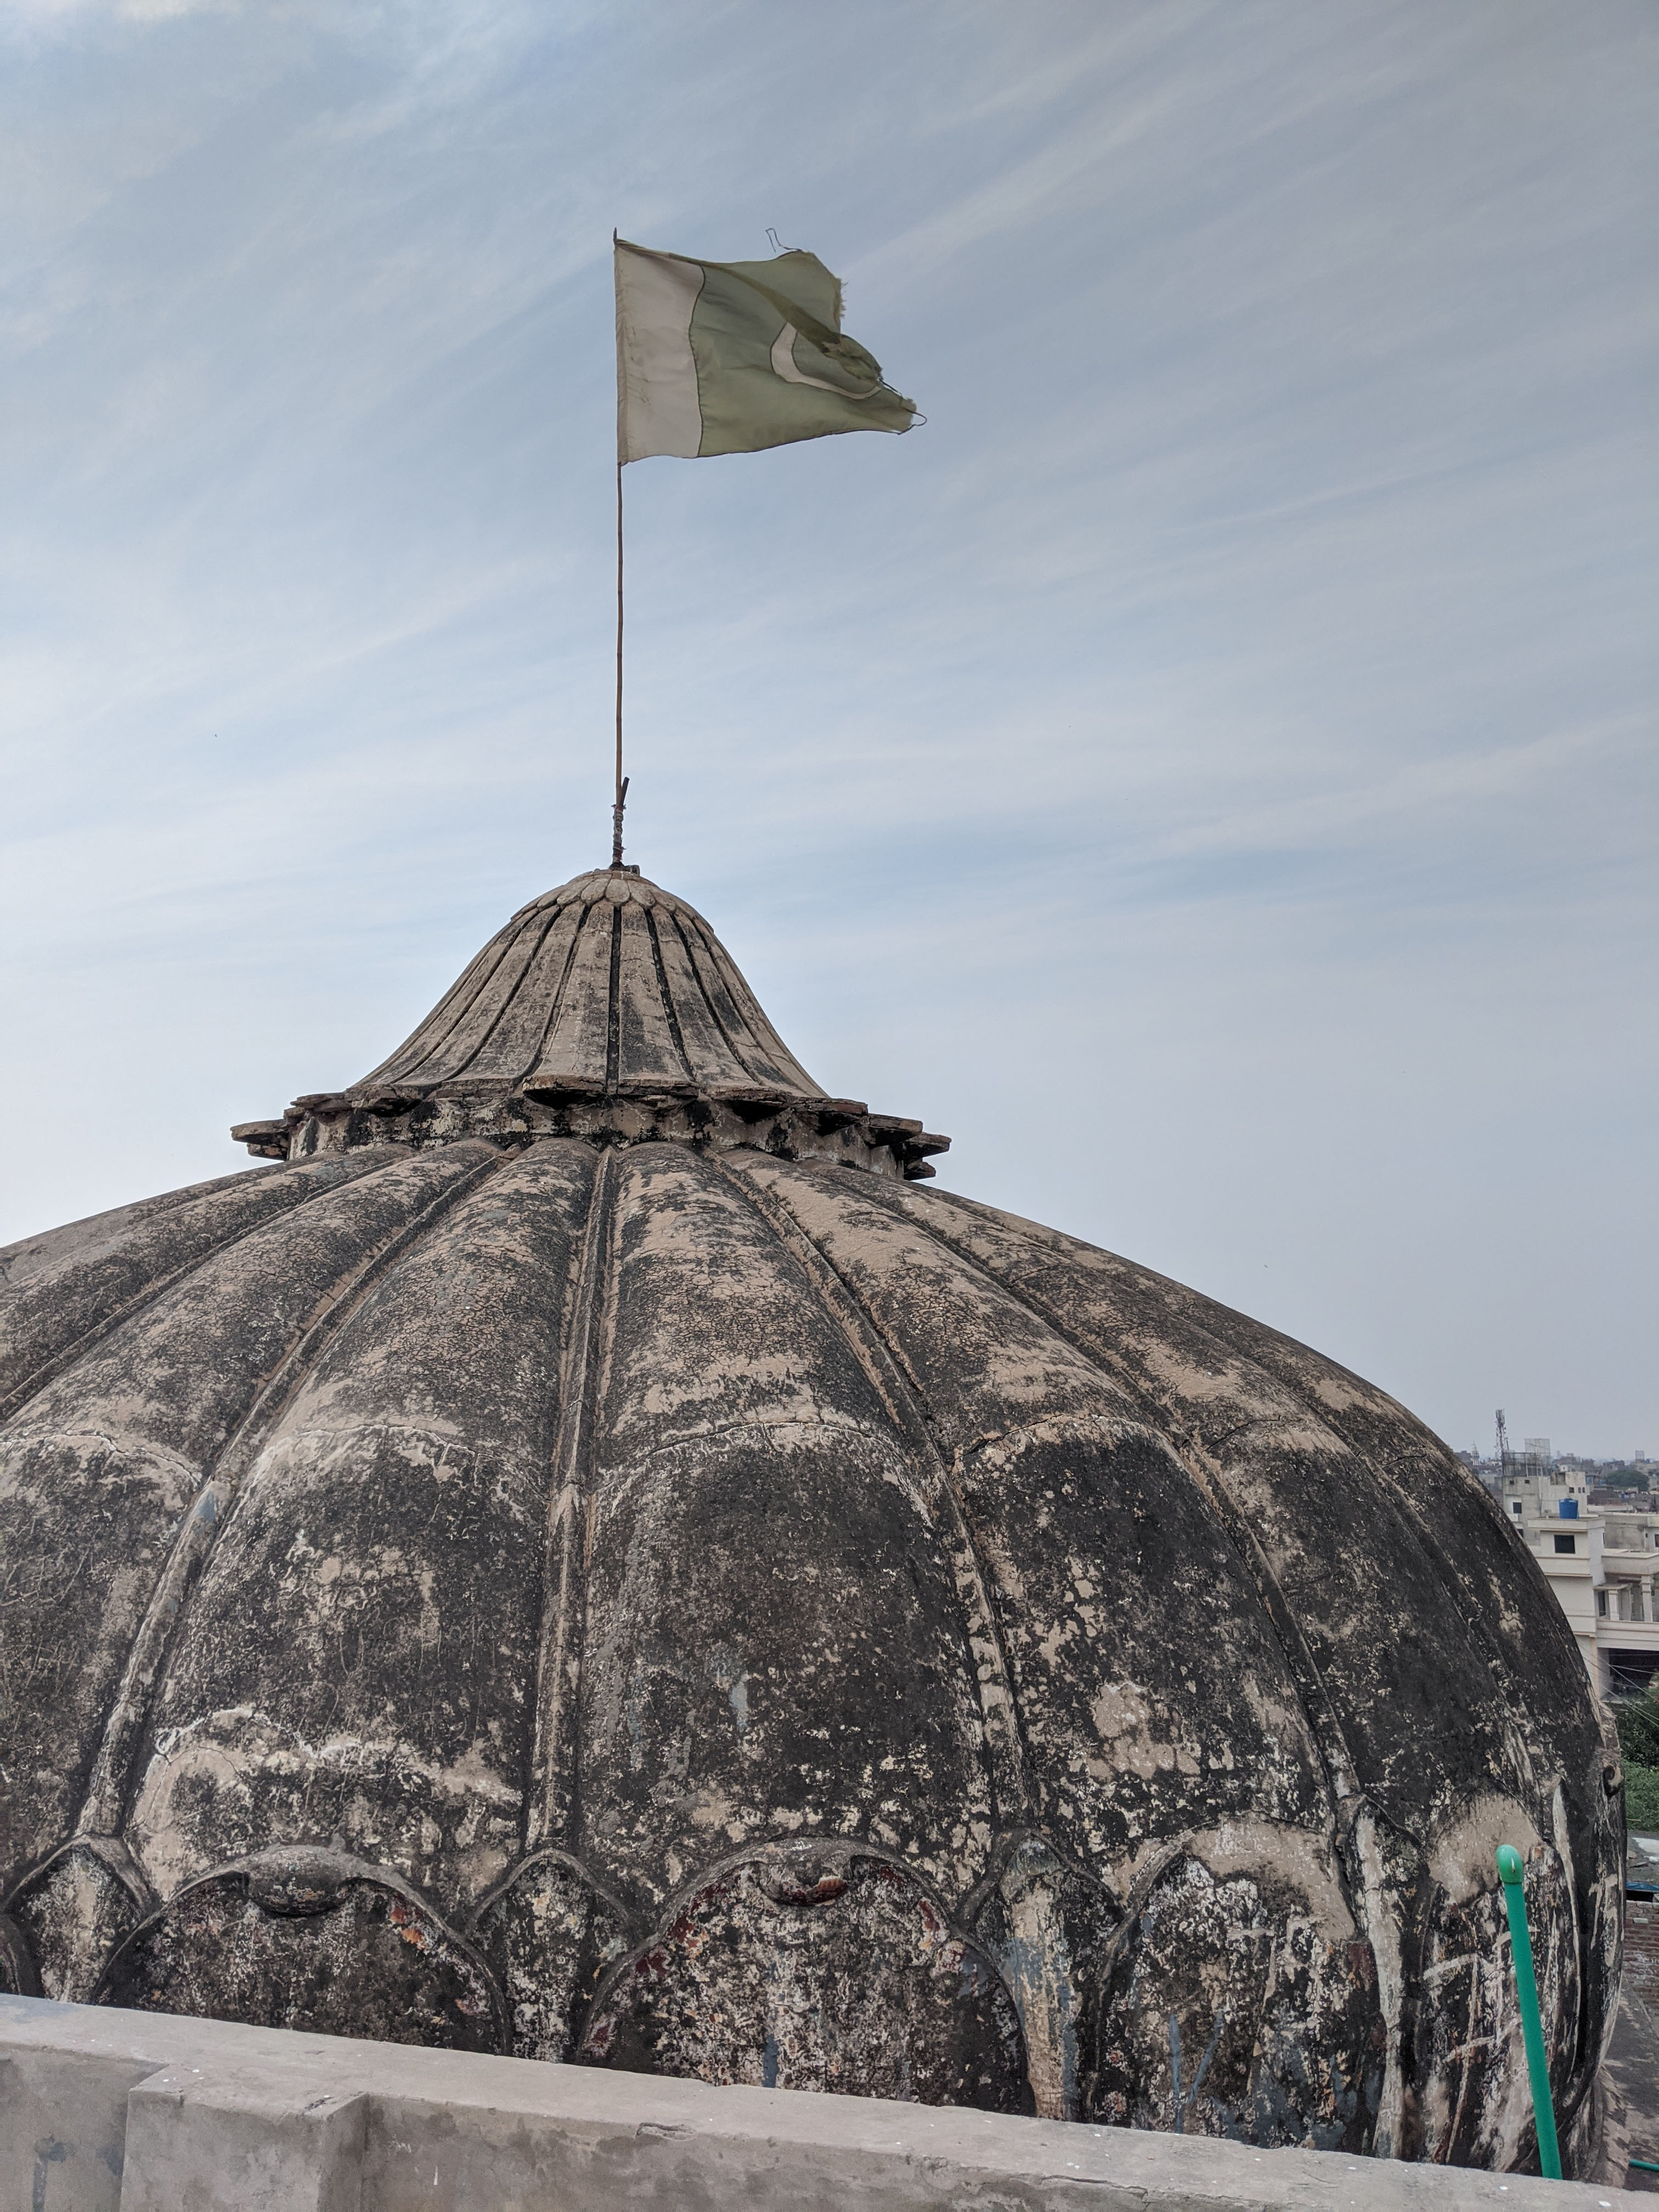 ONLY FOR FEATURE Babri Masjid by Haroon Khalid. All photographs are by Sameer Shafi Warraich